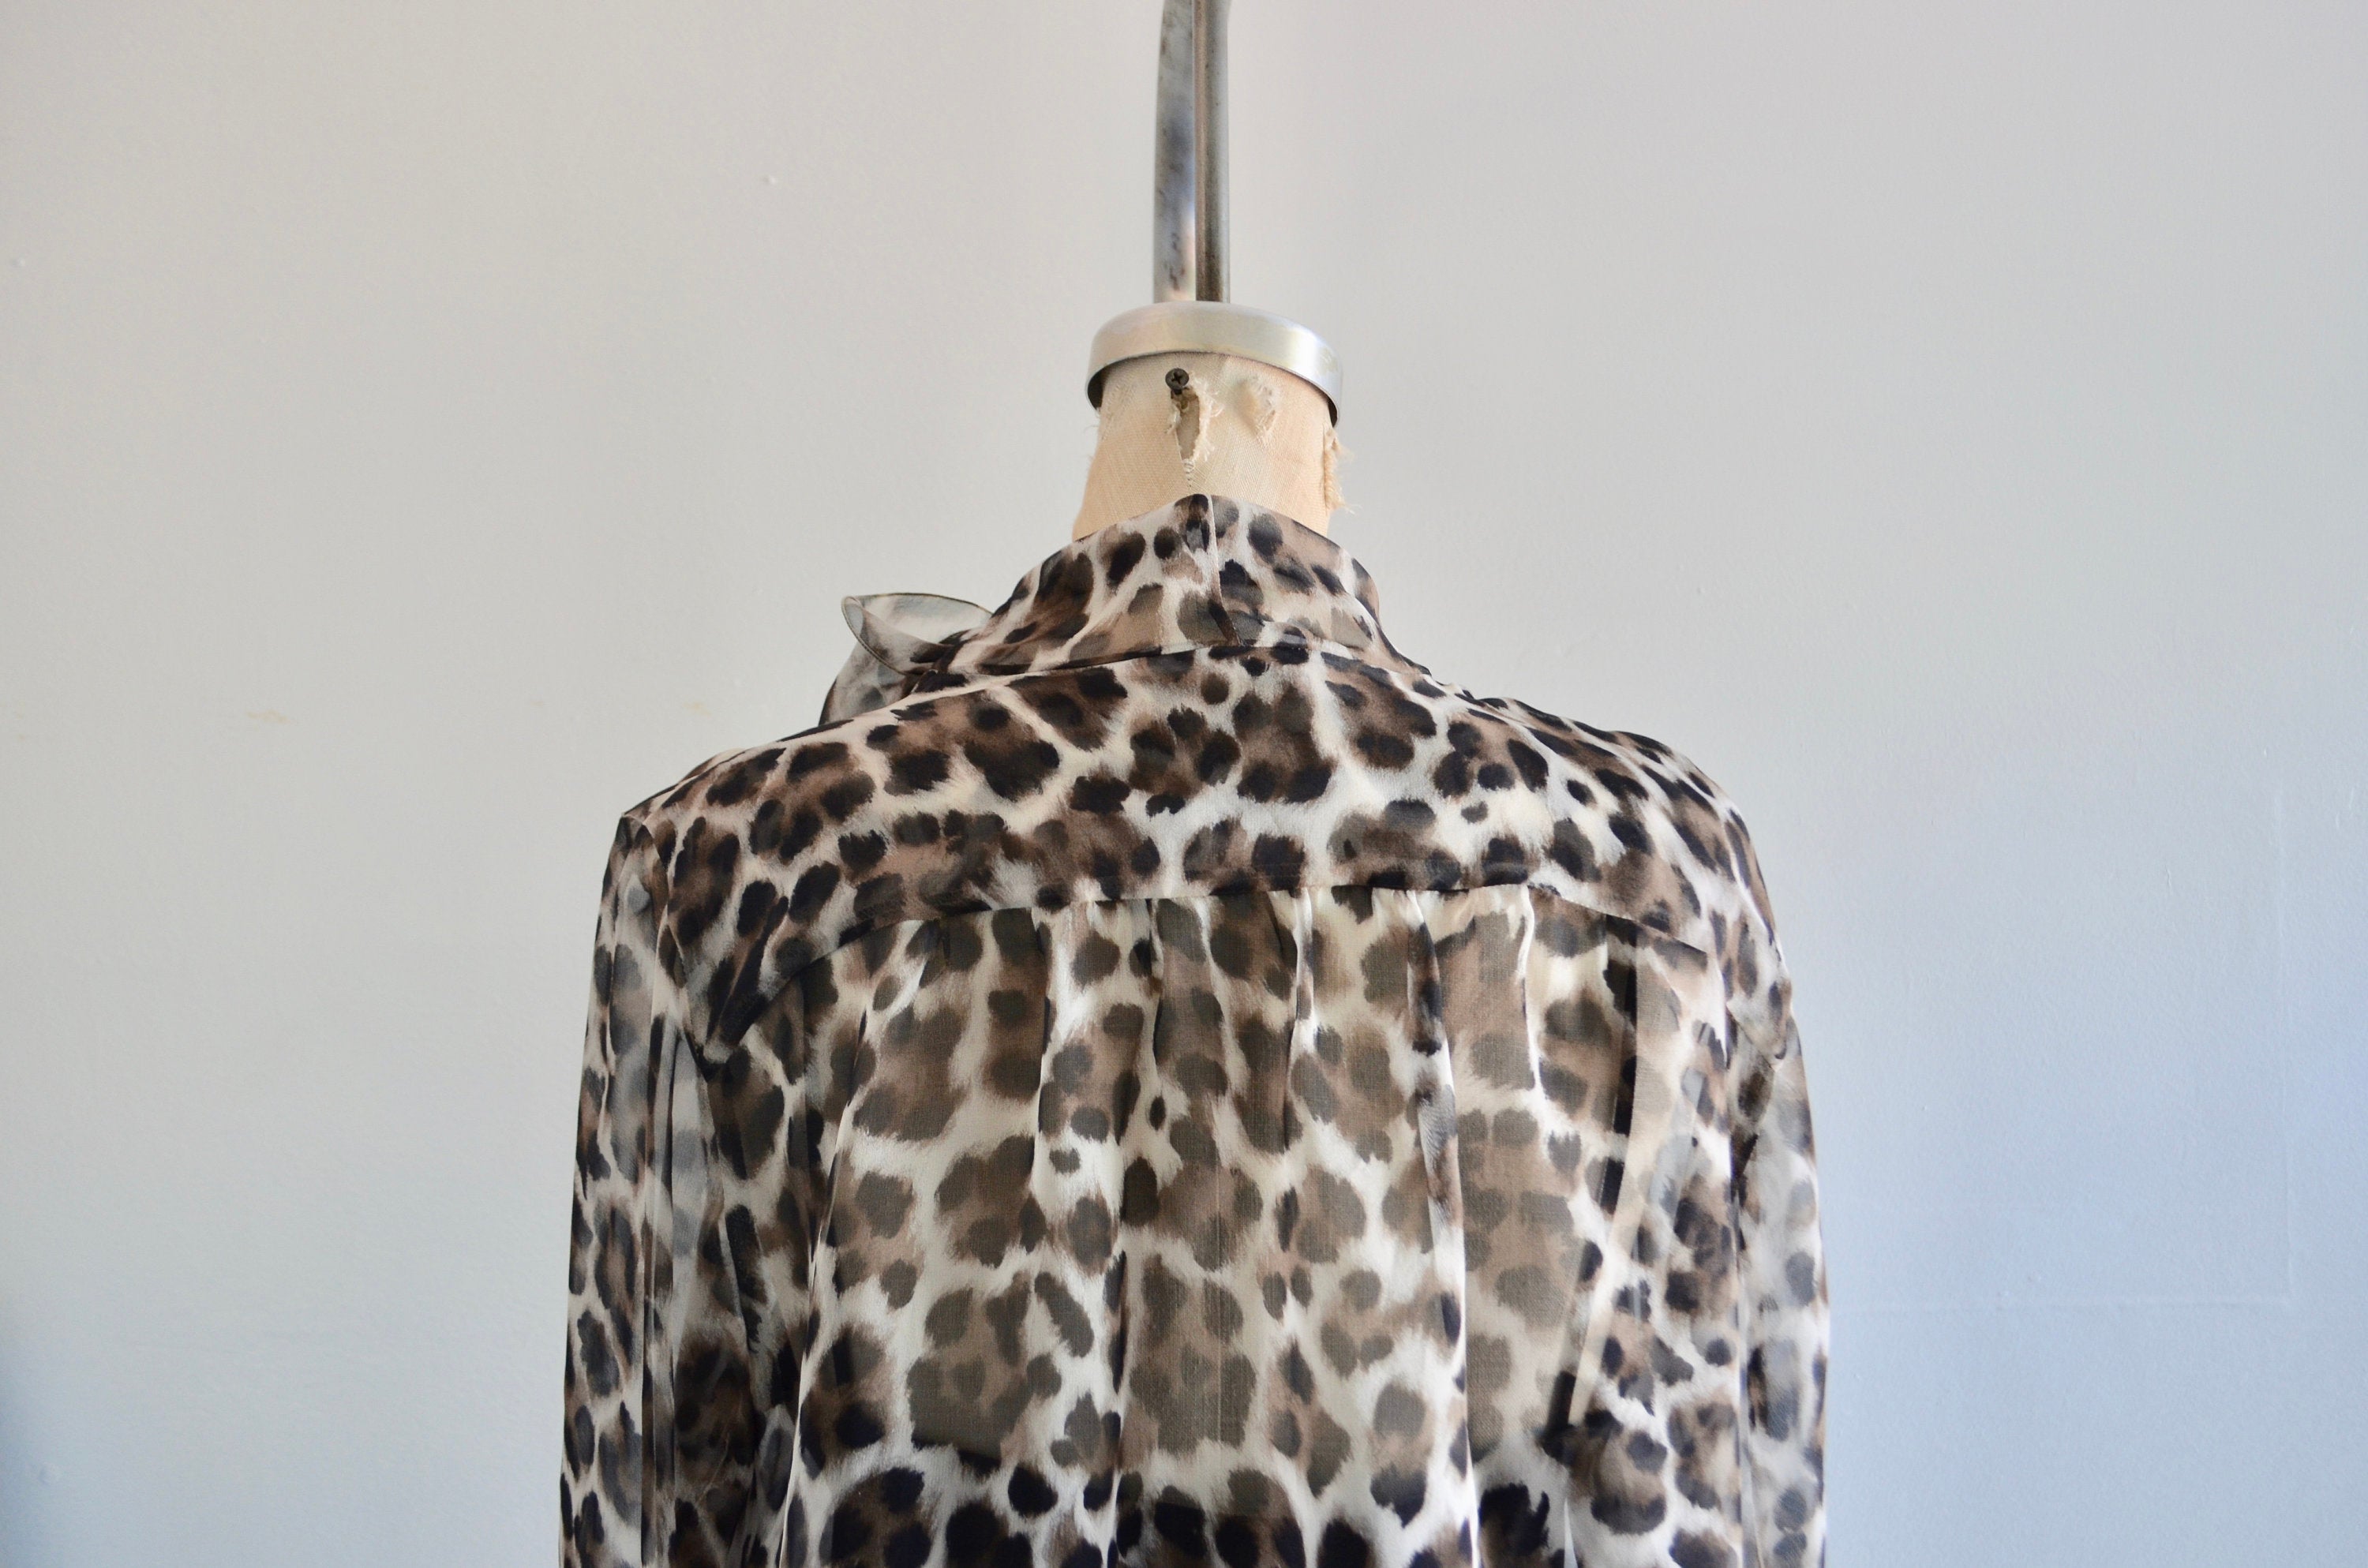 Les Copains Leopard Pussybow Sheer Blouse With Black Cami Top Twin Set Authentic